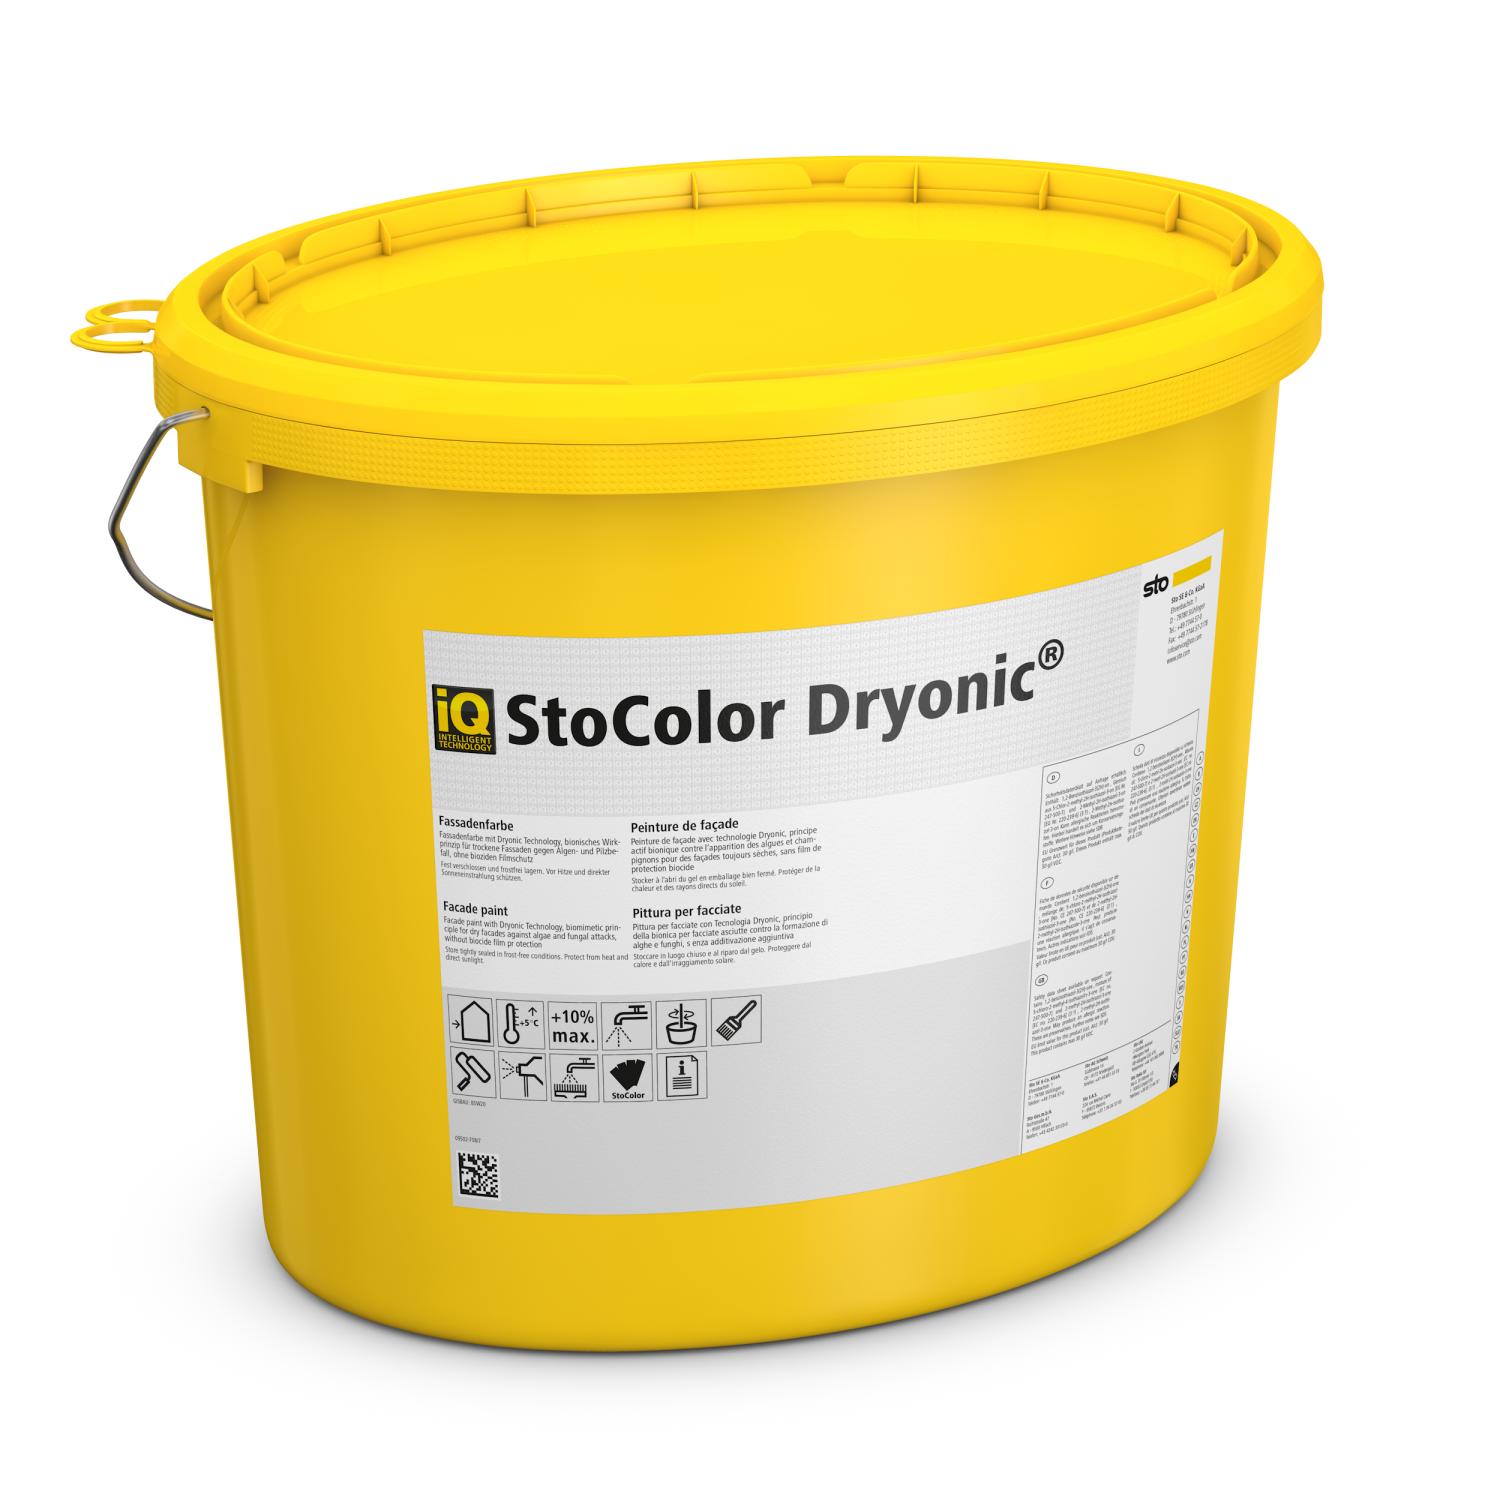 StoColor Dryonic®